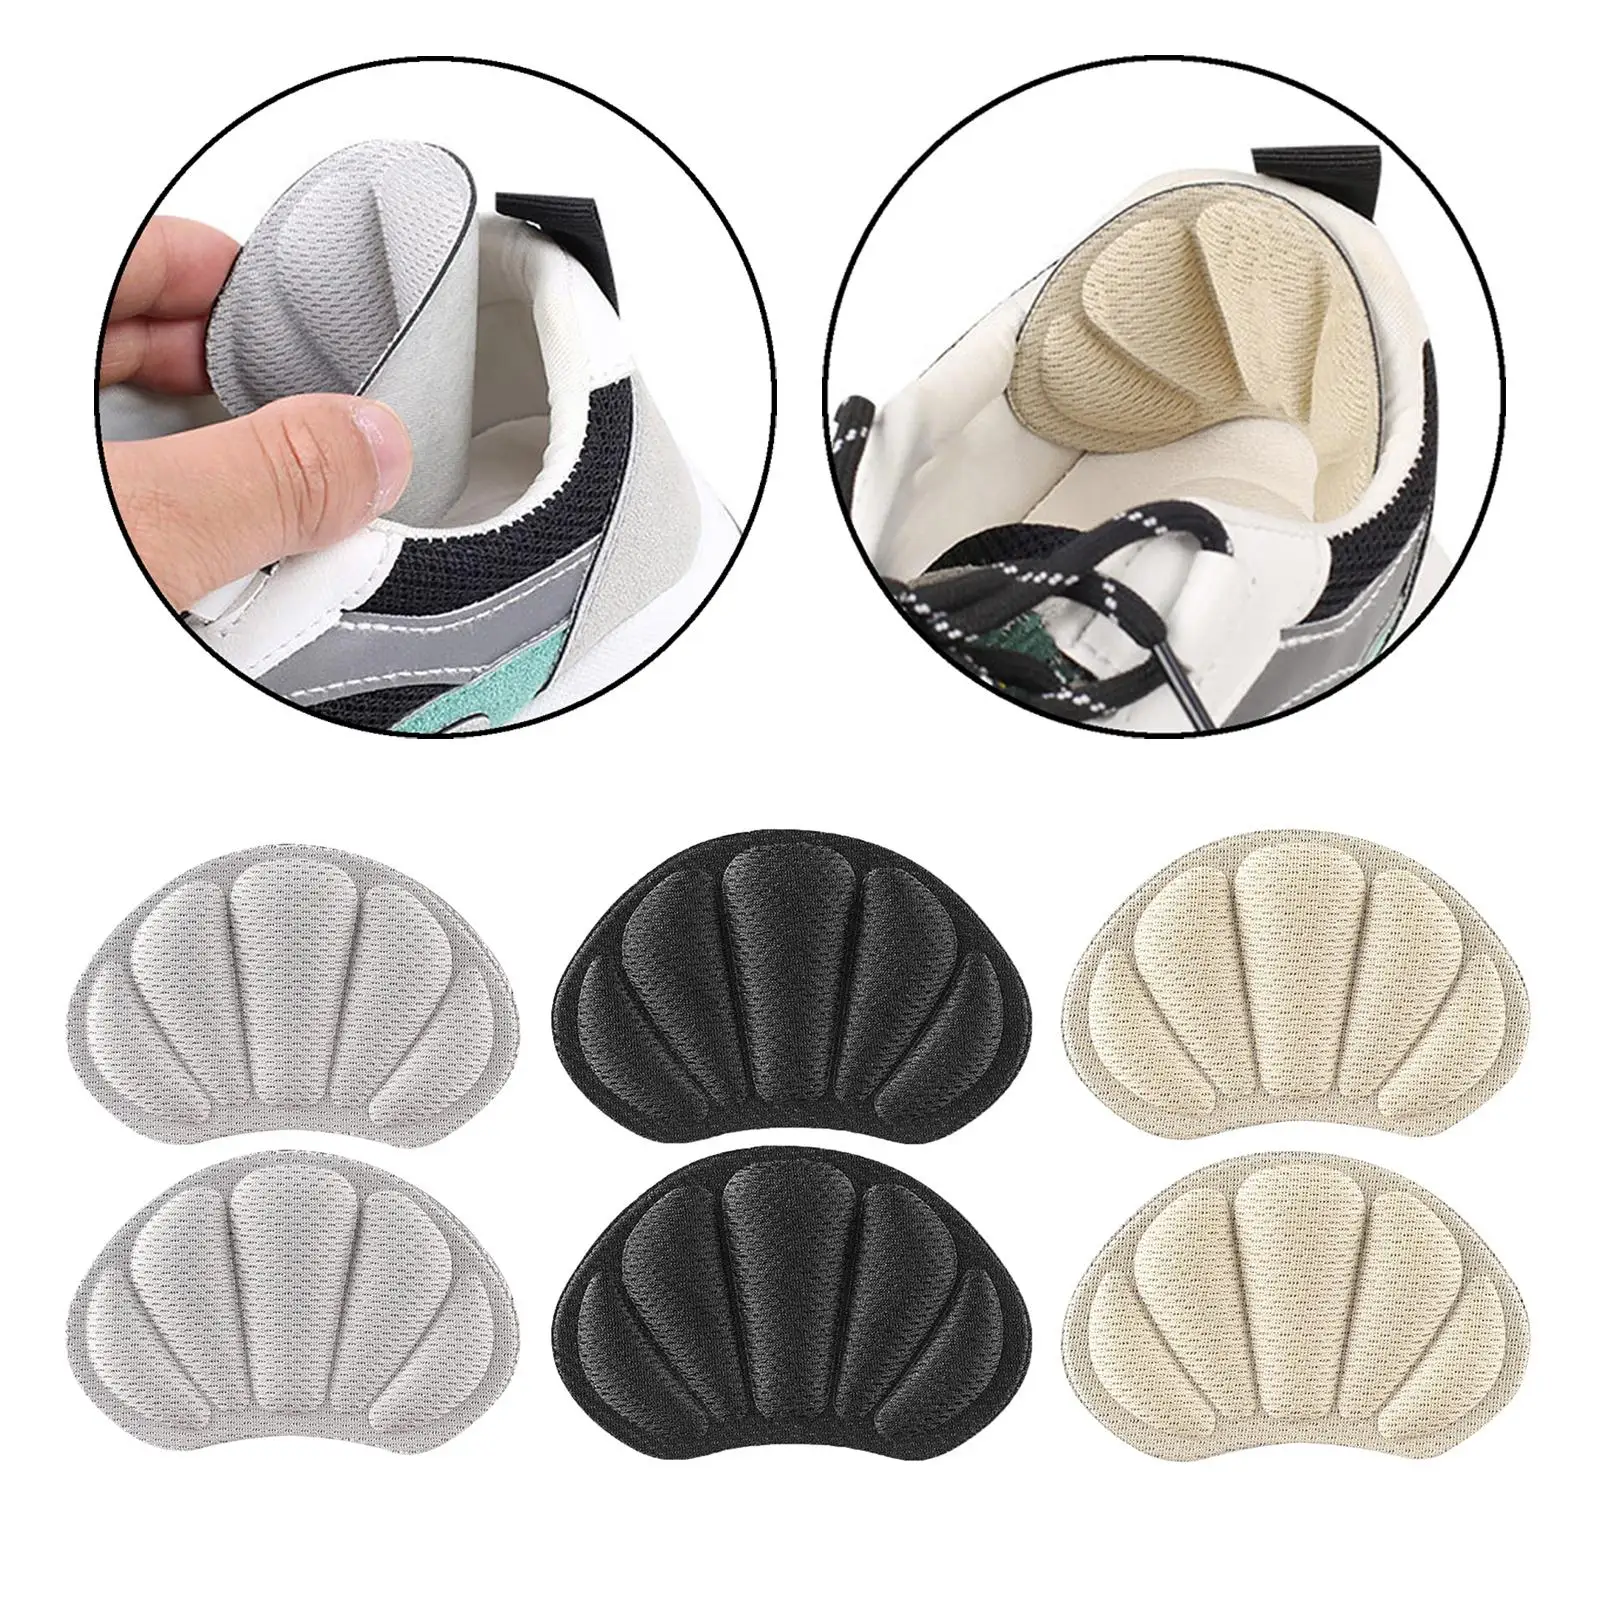 1 Pair Heel Protectors Shoe Sticker Liner Insoles Extra Thick Anti Slip Cuttable Adhesive Liner for Loose Shoes Adults Rubbing